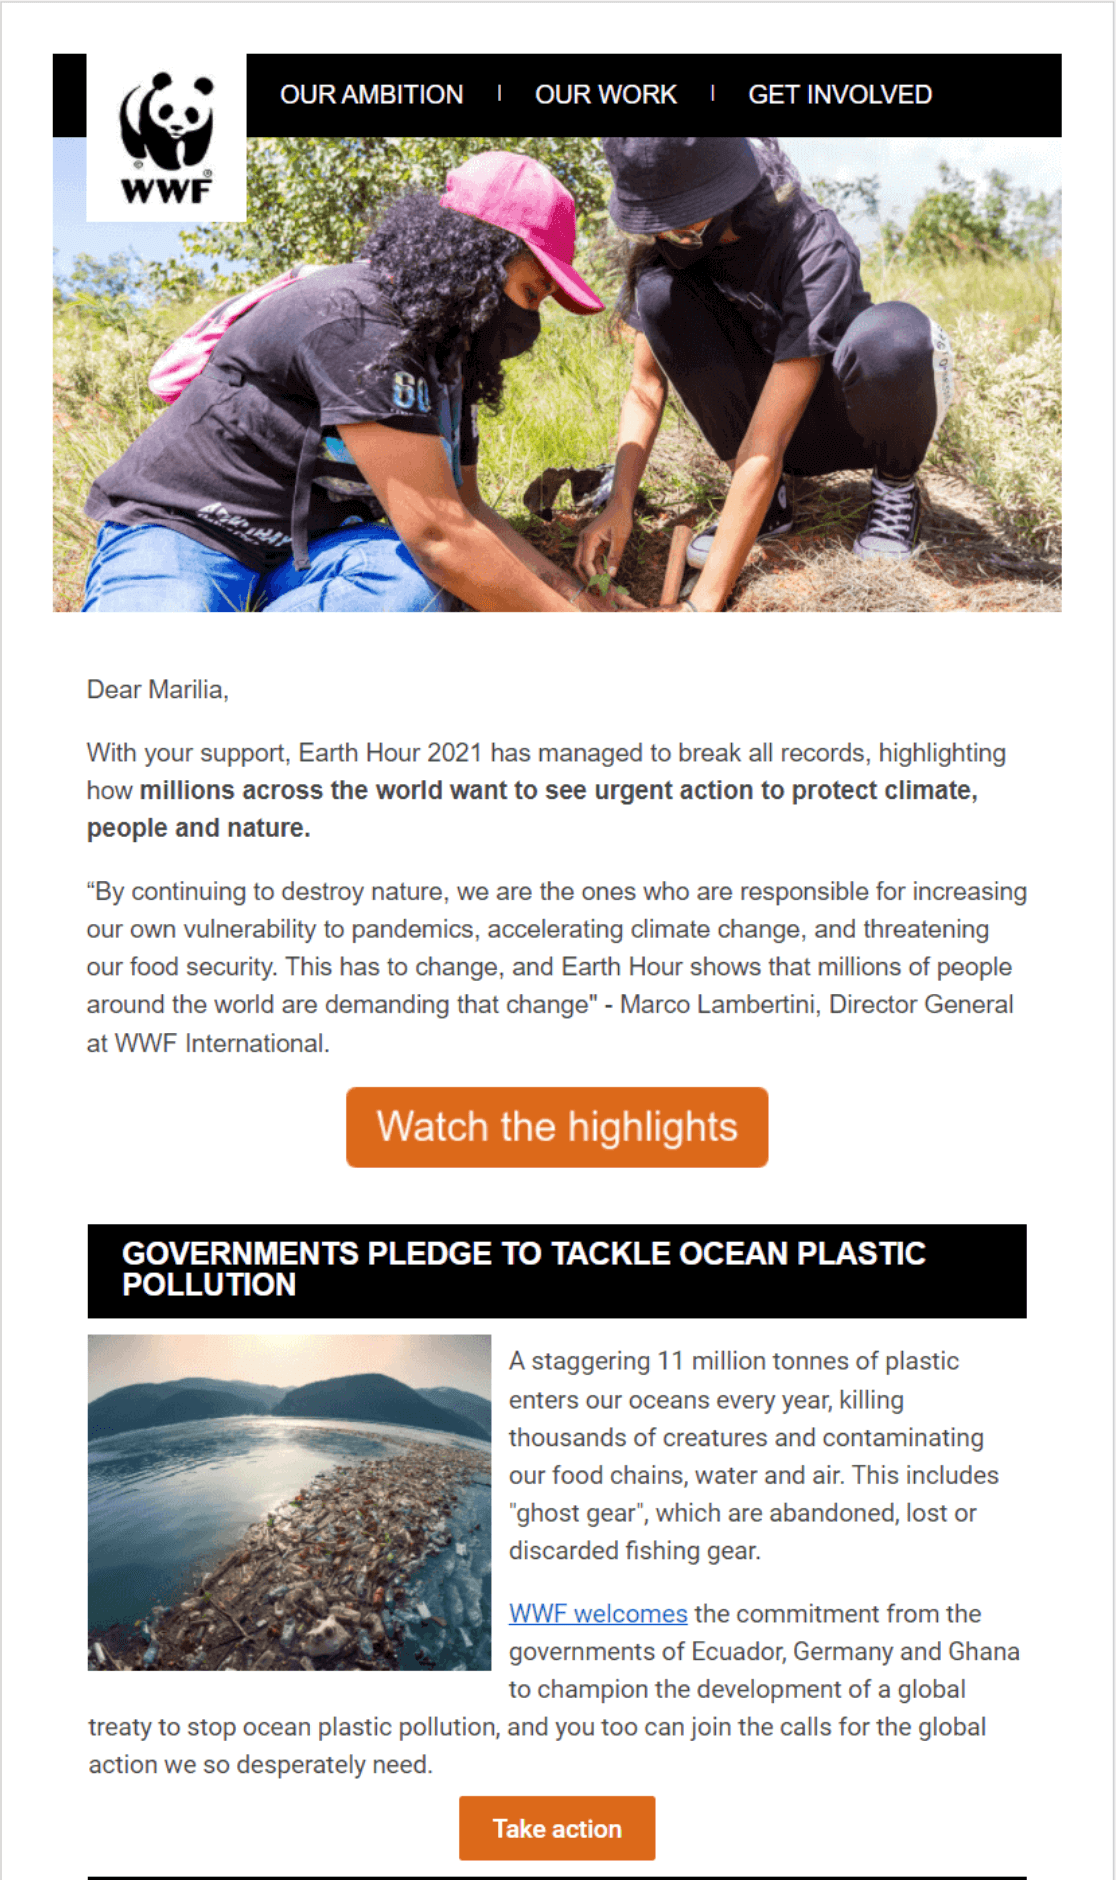 WWF's newsletter featuring an image of two girls planting a tree followed by a feature about ocean plastic pollution